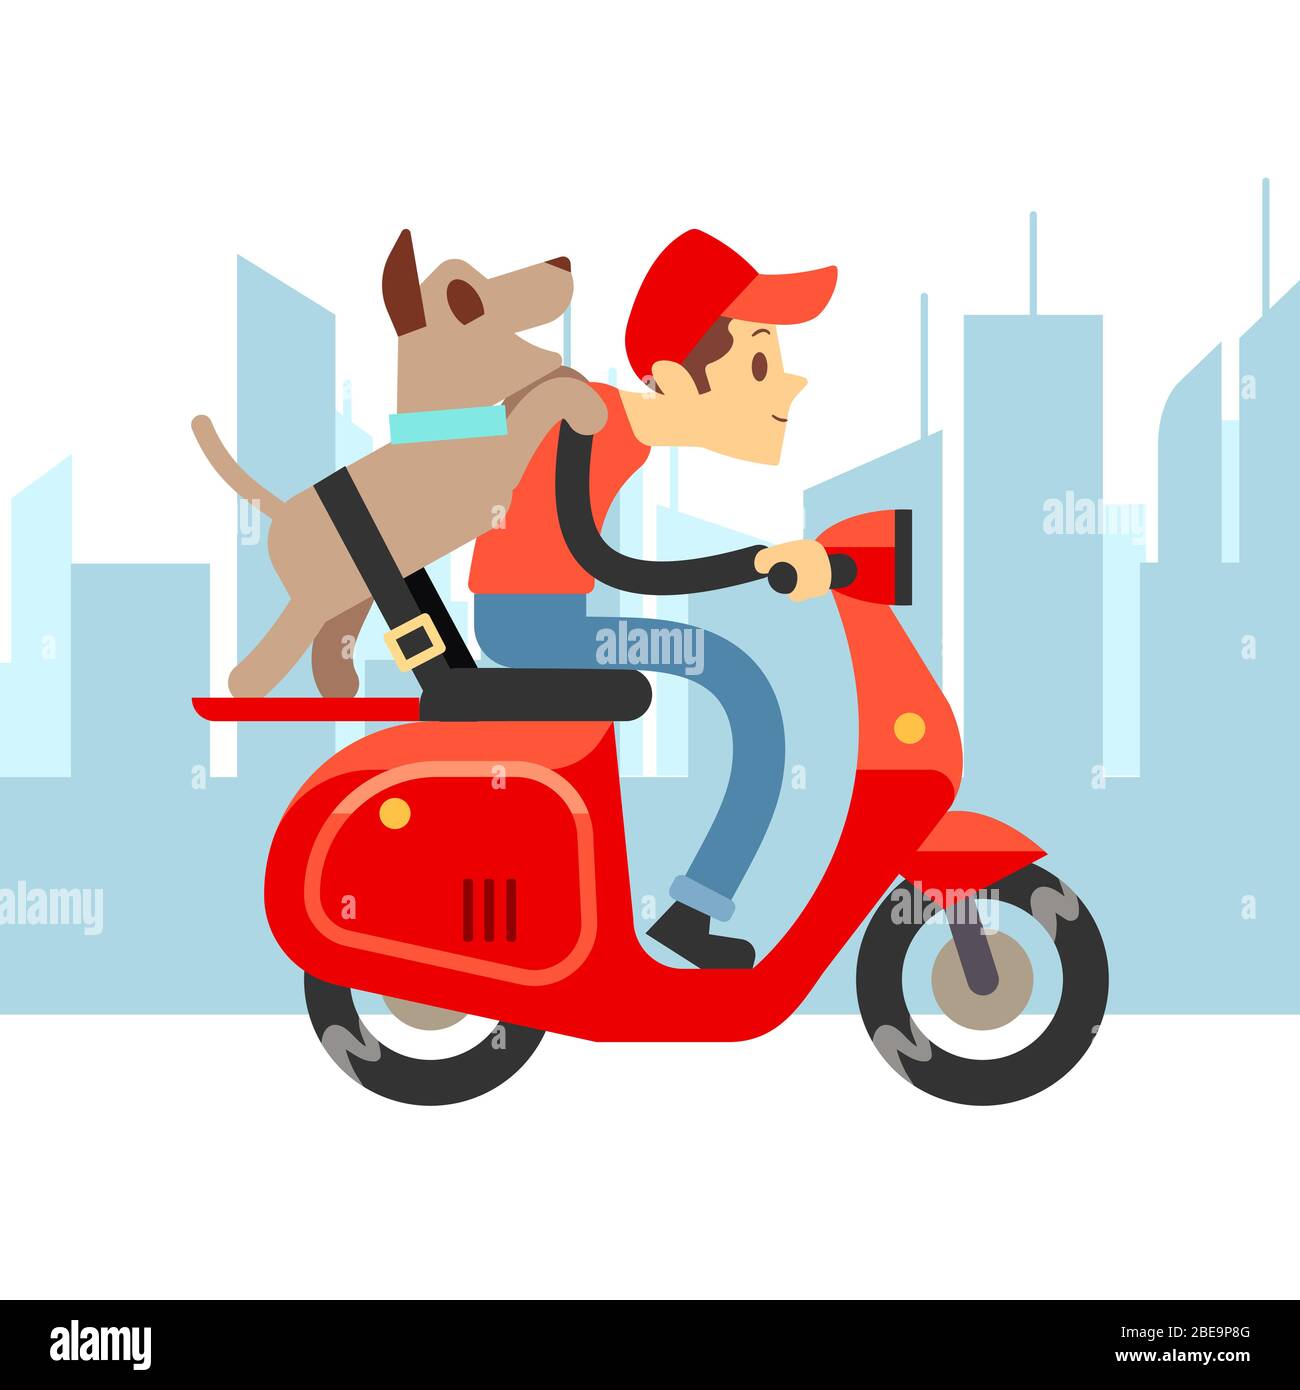 Travel with pets - young man on moto with dog and city landscape. Boy with dog on moped ride, vector illustration Stock Vector